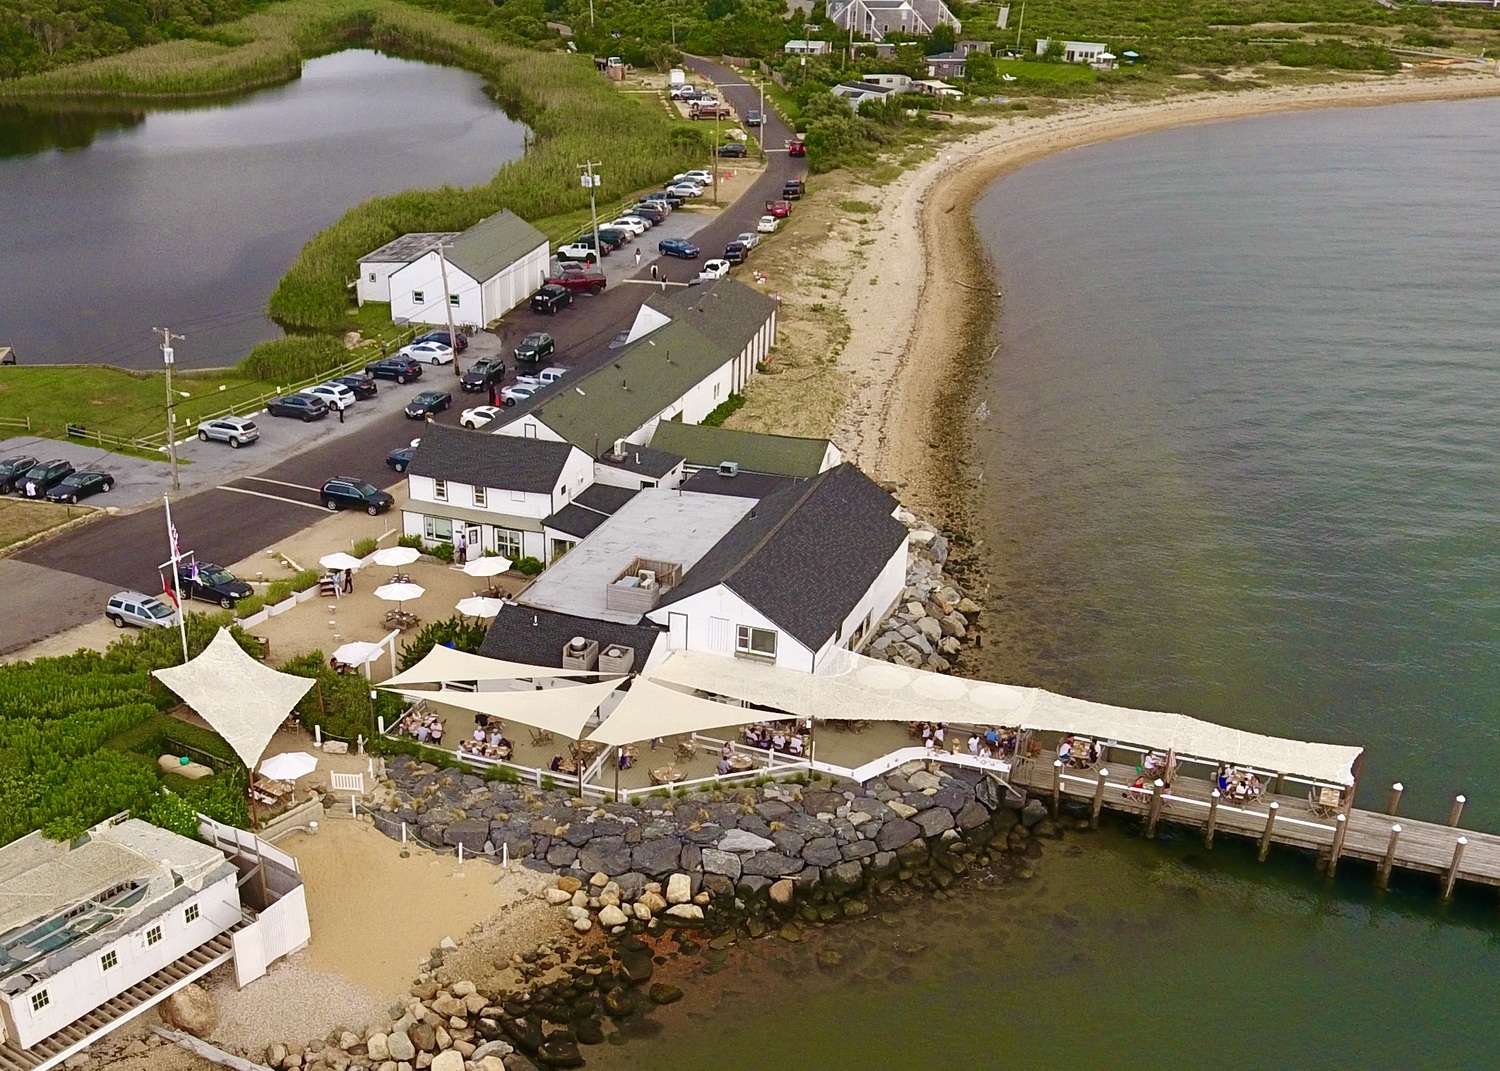 Duryea's Montauk may keep its outdoor seating for now but any future evidence of expansions or changes to the operations could imperil its certificate of occupancy, a judge said last month.